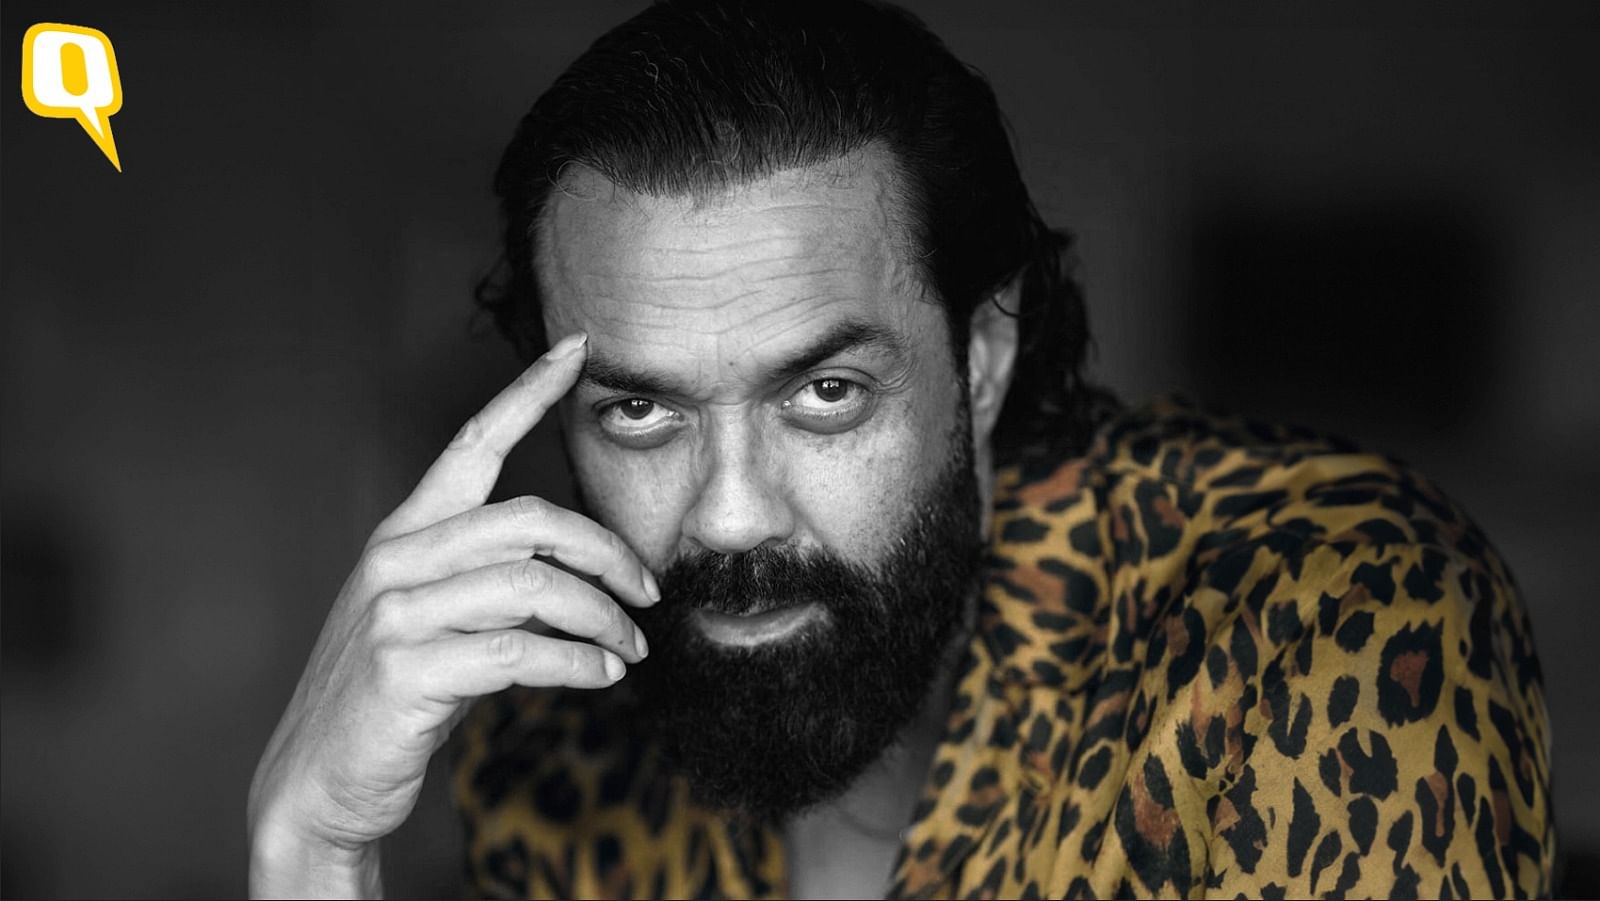 <div class="paragraphs"><p><a href="https://www.thequint.com/neon/animal-move-sandeep-vanga-glorifies-misogyny-or-entertains-delhi-on-alpha-males-and-filmmakers-liberty">Bobby Deol</a> is riding high on the success he has received for his role of Abrar in 'Animal'.&nbsp;</p></div>